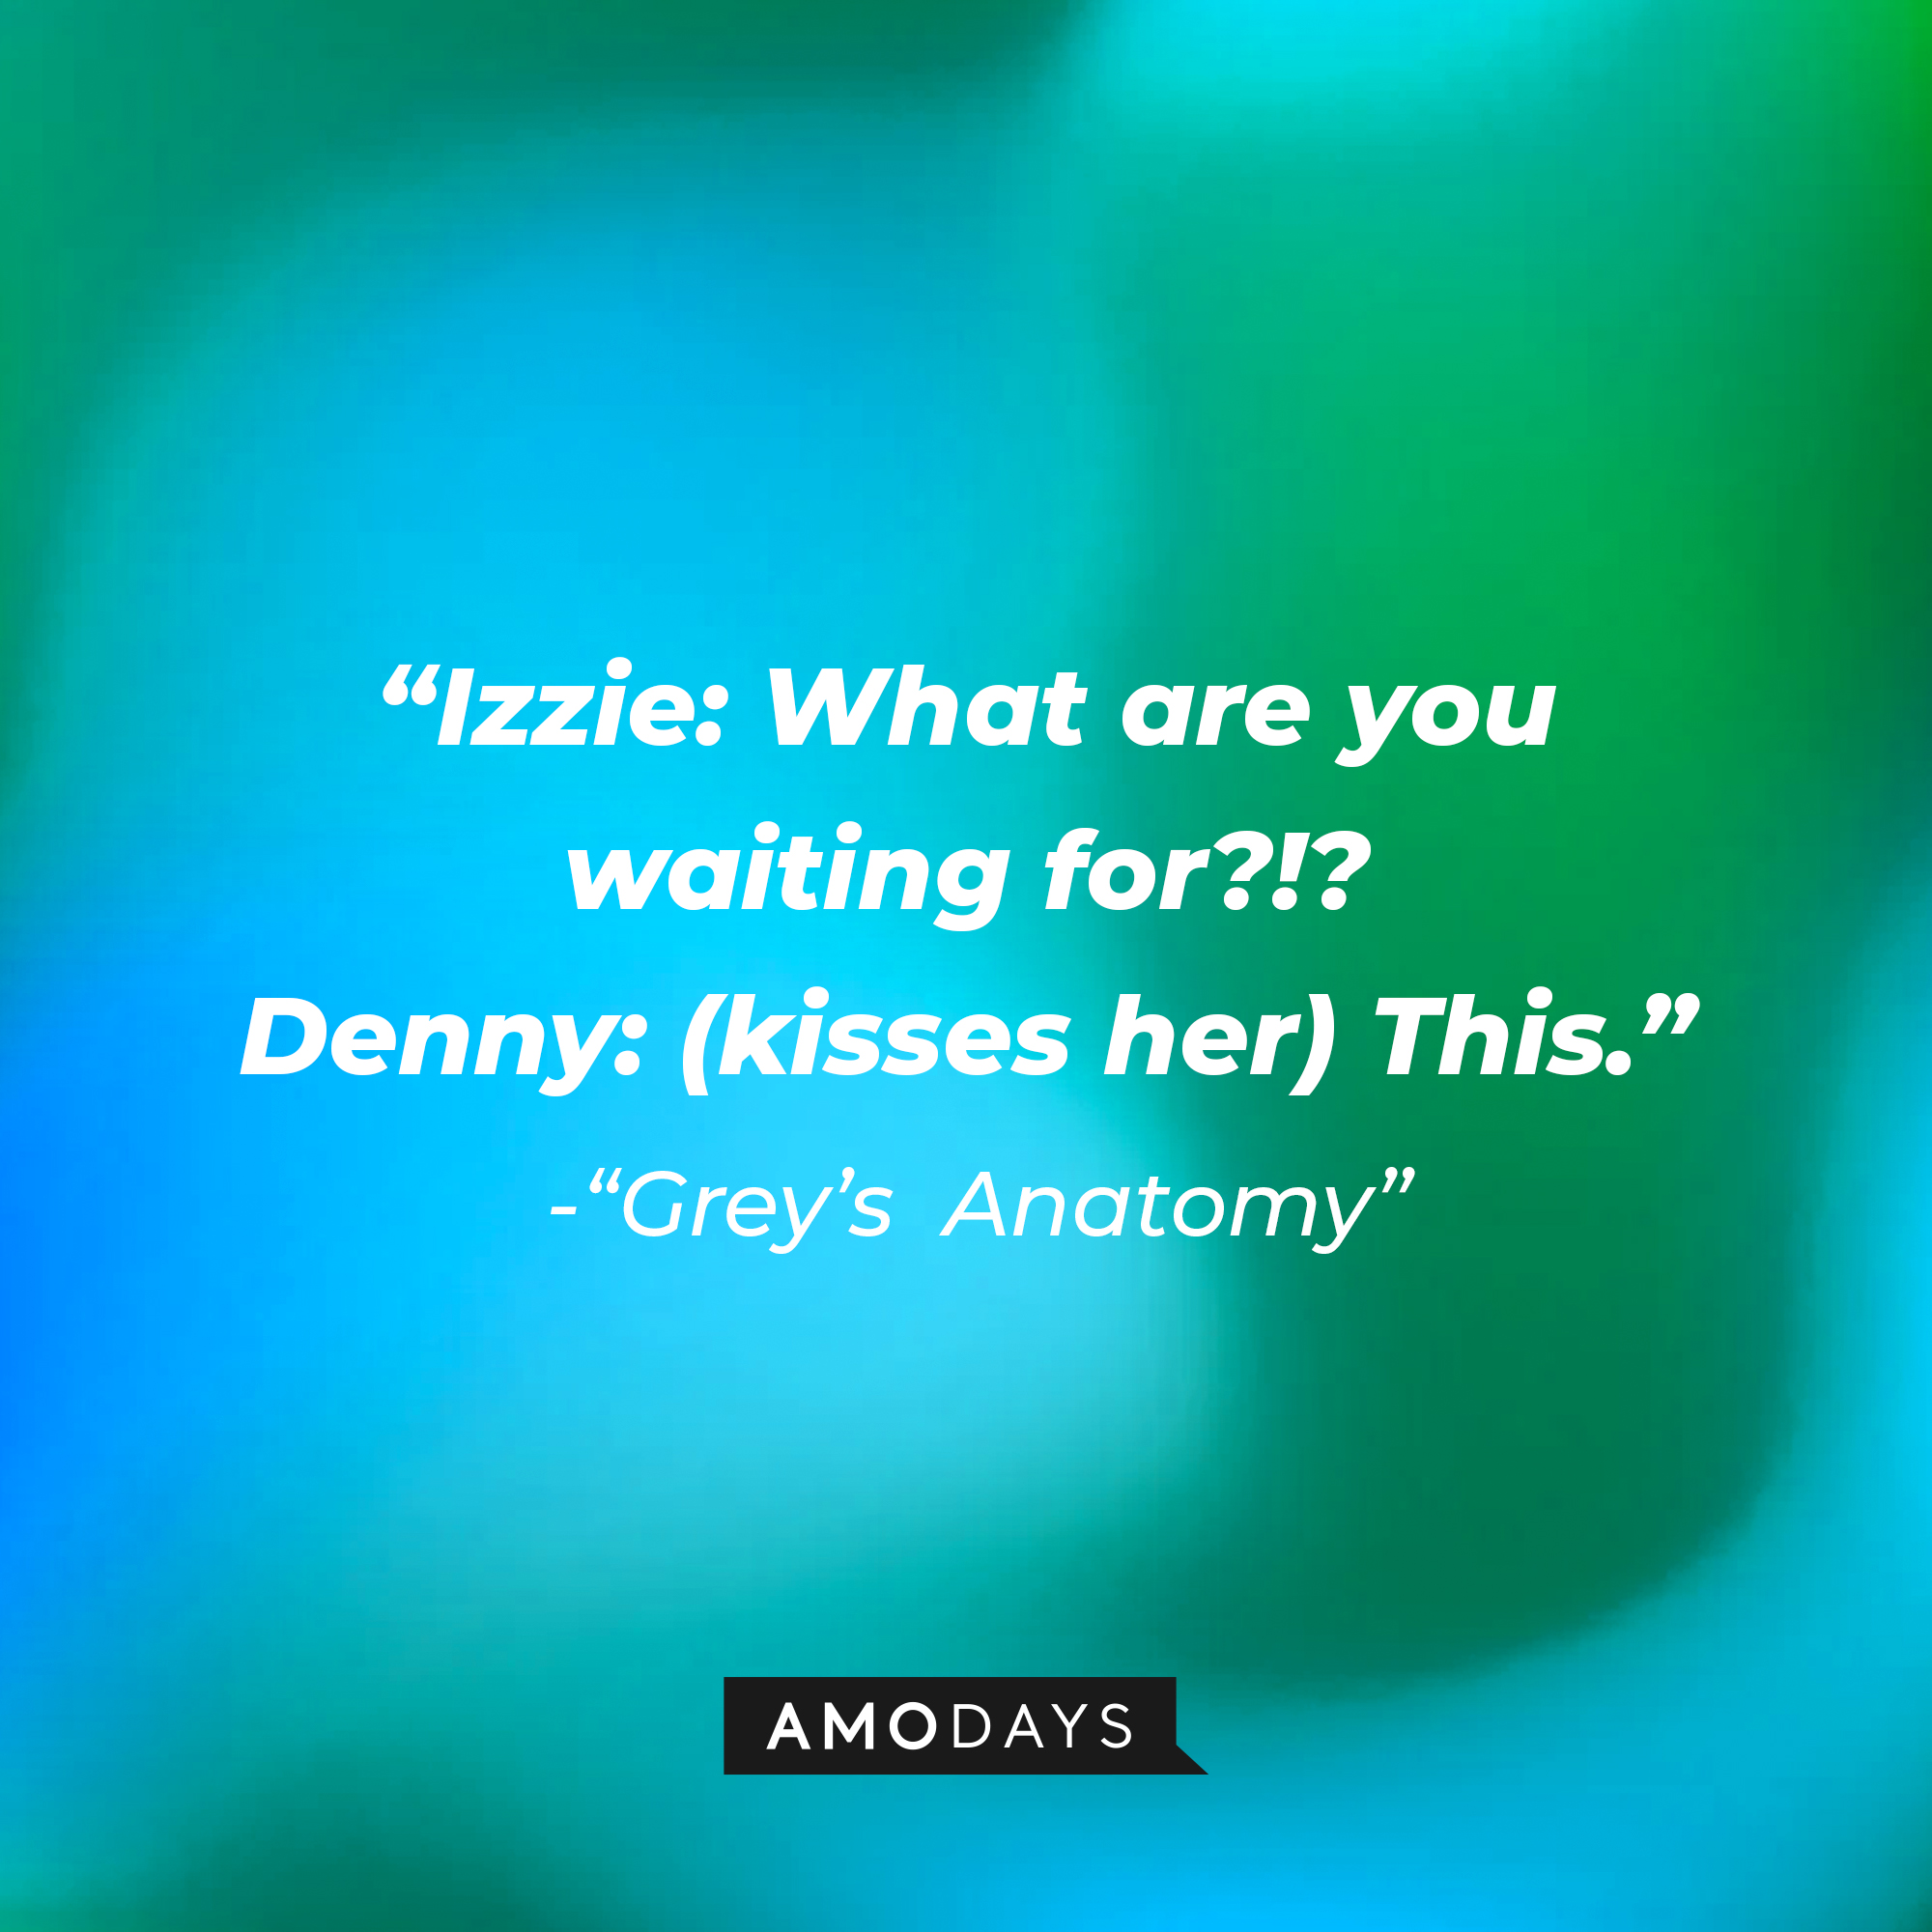 Izzie Stevens' quote: "What are you waiting for?!?" Denny: (kisses her) "This." | Image: Amodays